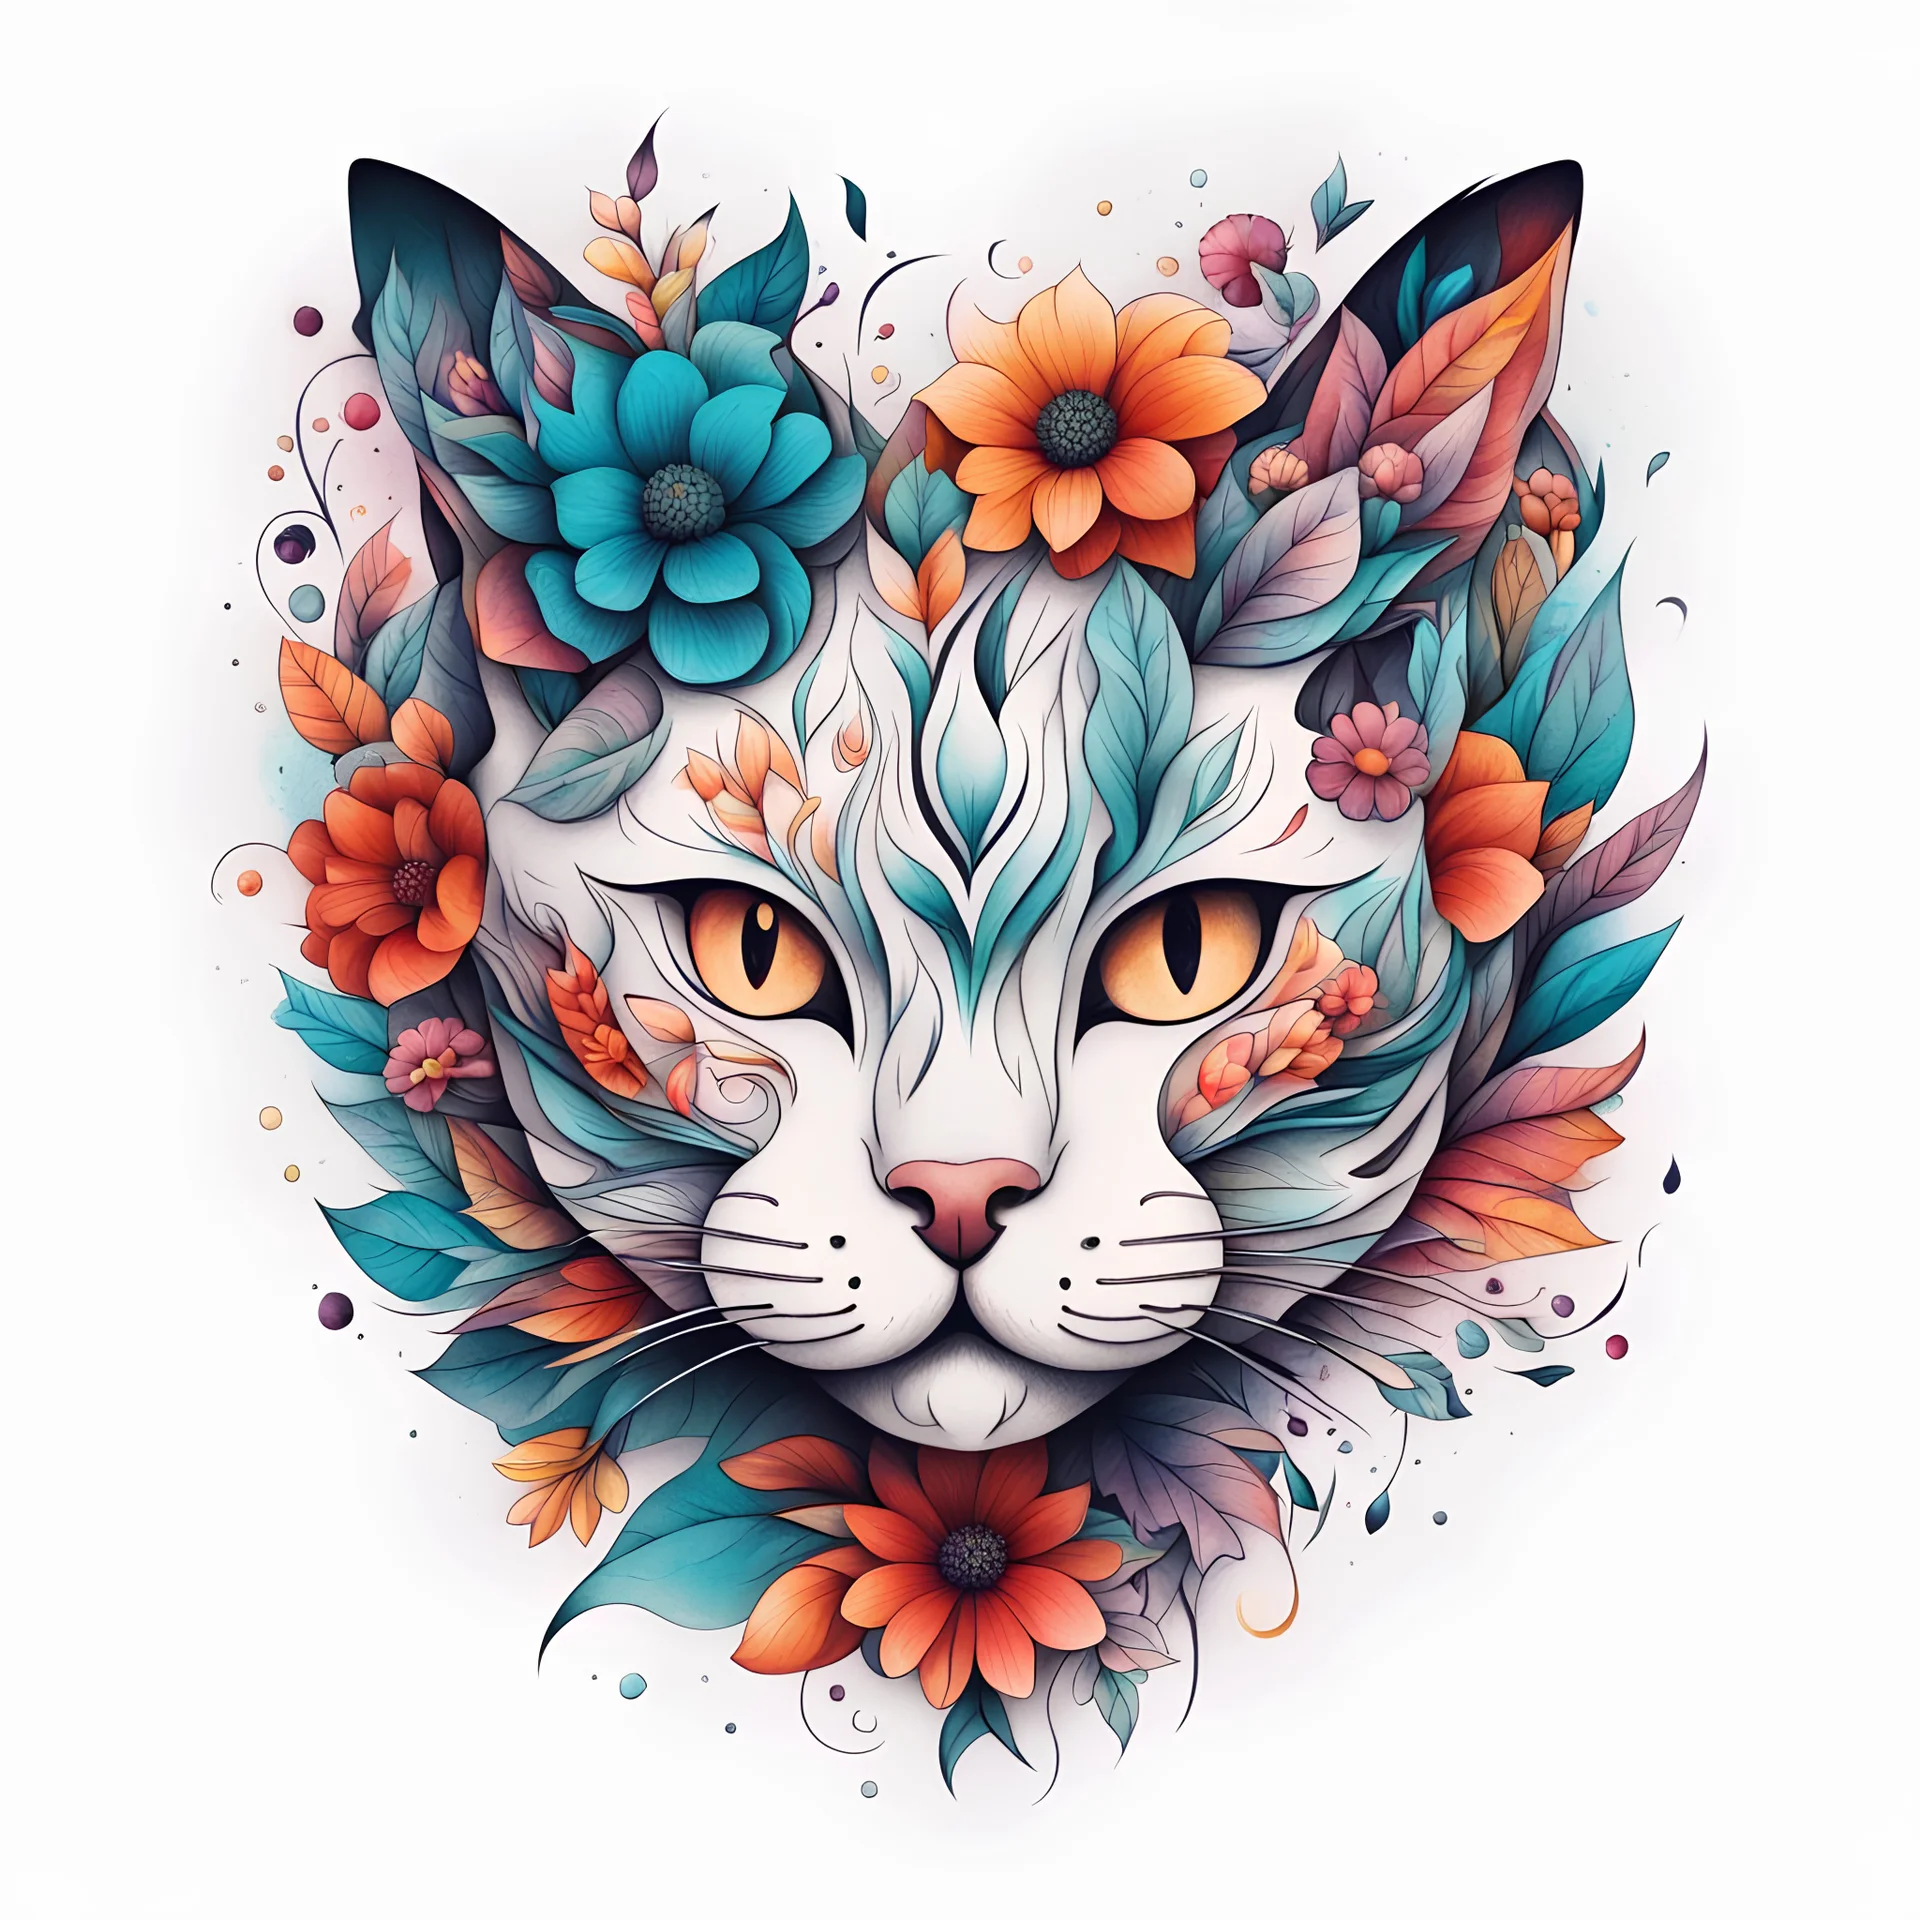 modern abstract tattoo ideas, simple minimalistic illustration on a pure white background < "The head of a tattooed cat. around it are various colorful flowers and leaves in a dynamic image">